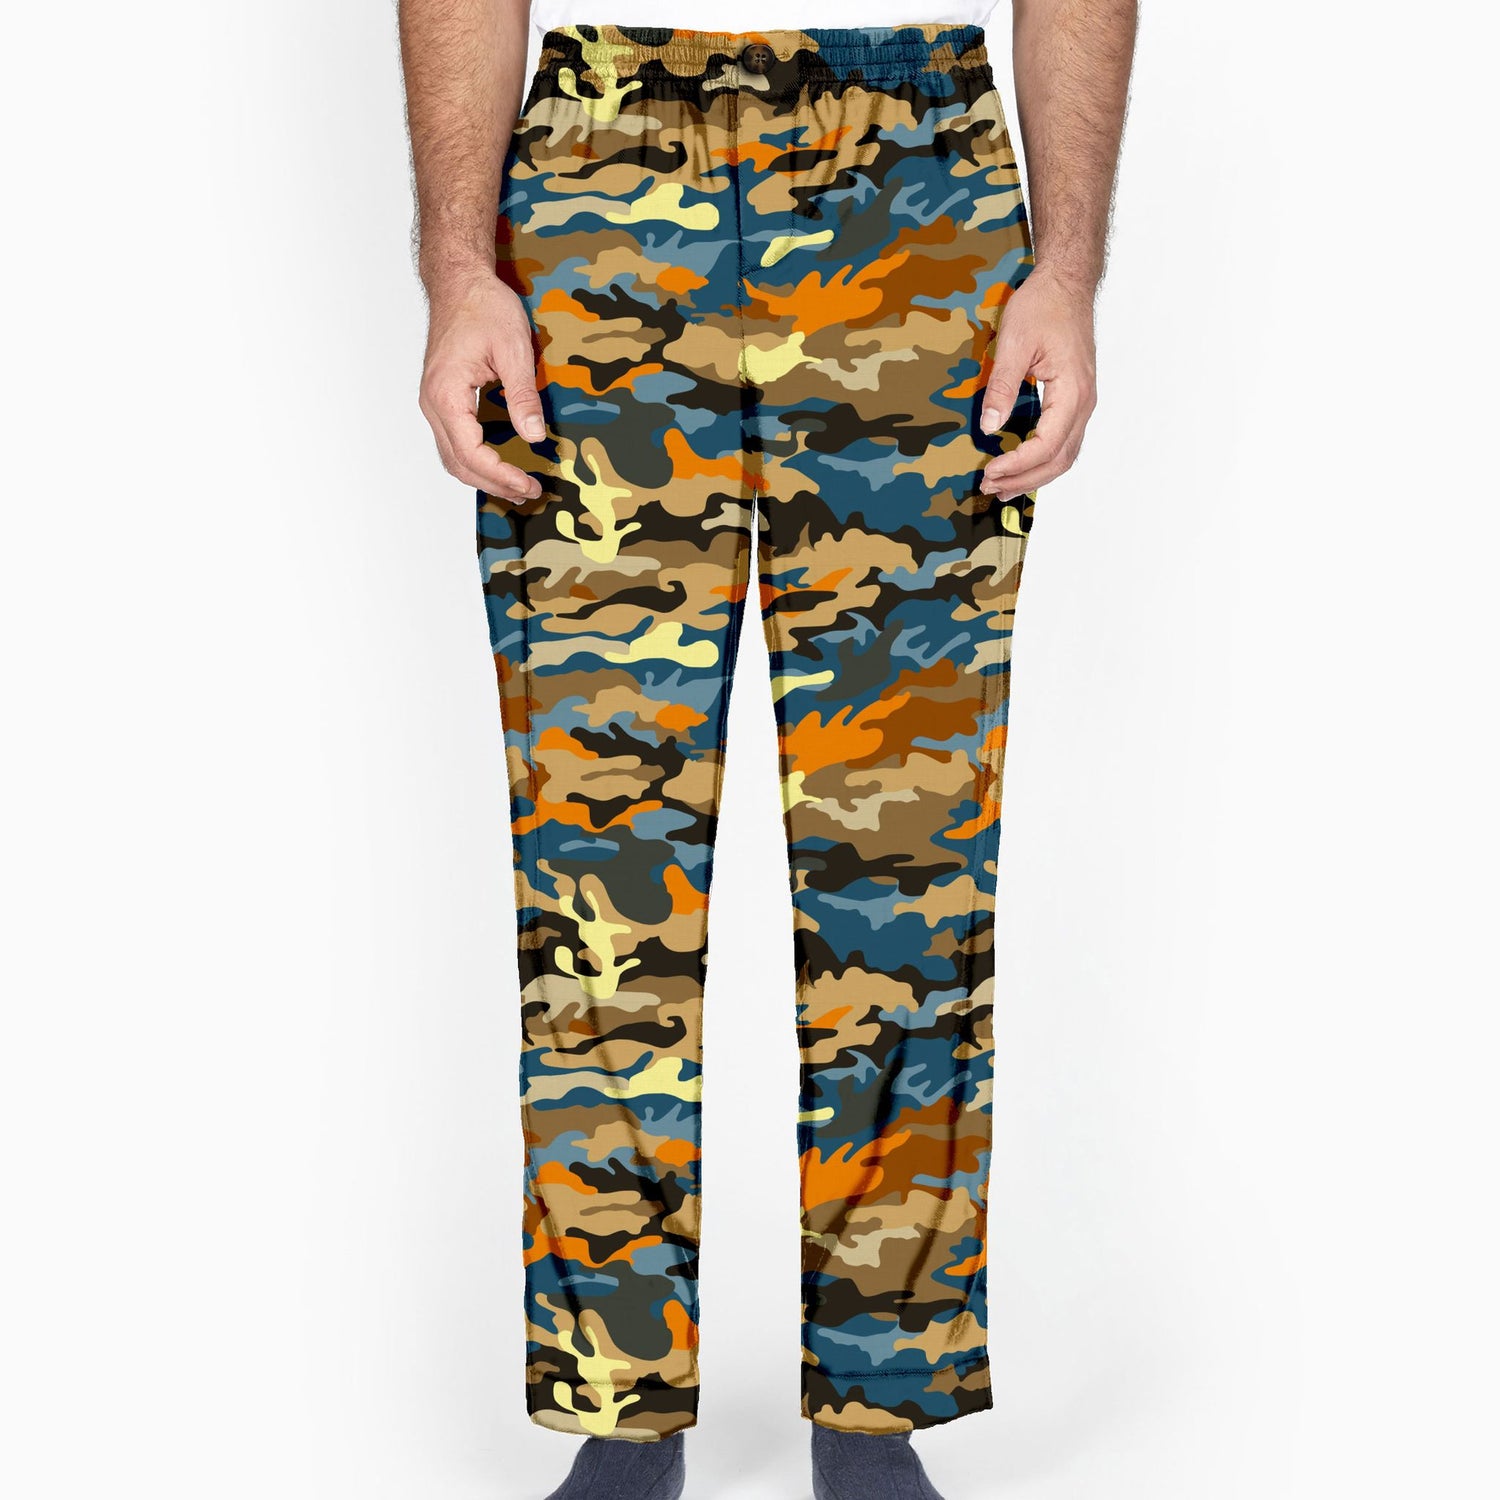 The Modern Life is Rubbish Camouflage Lounge Pant